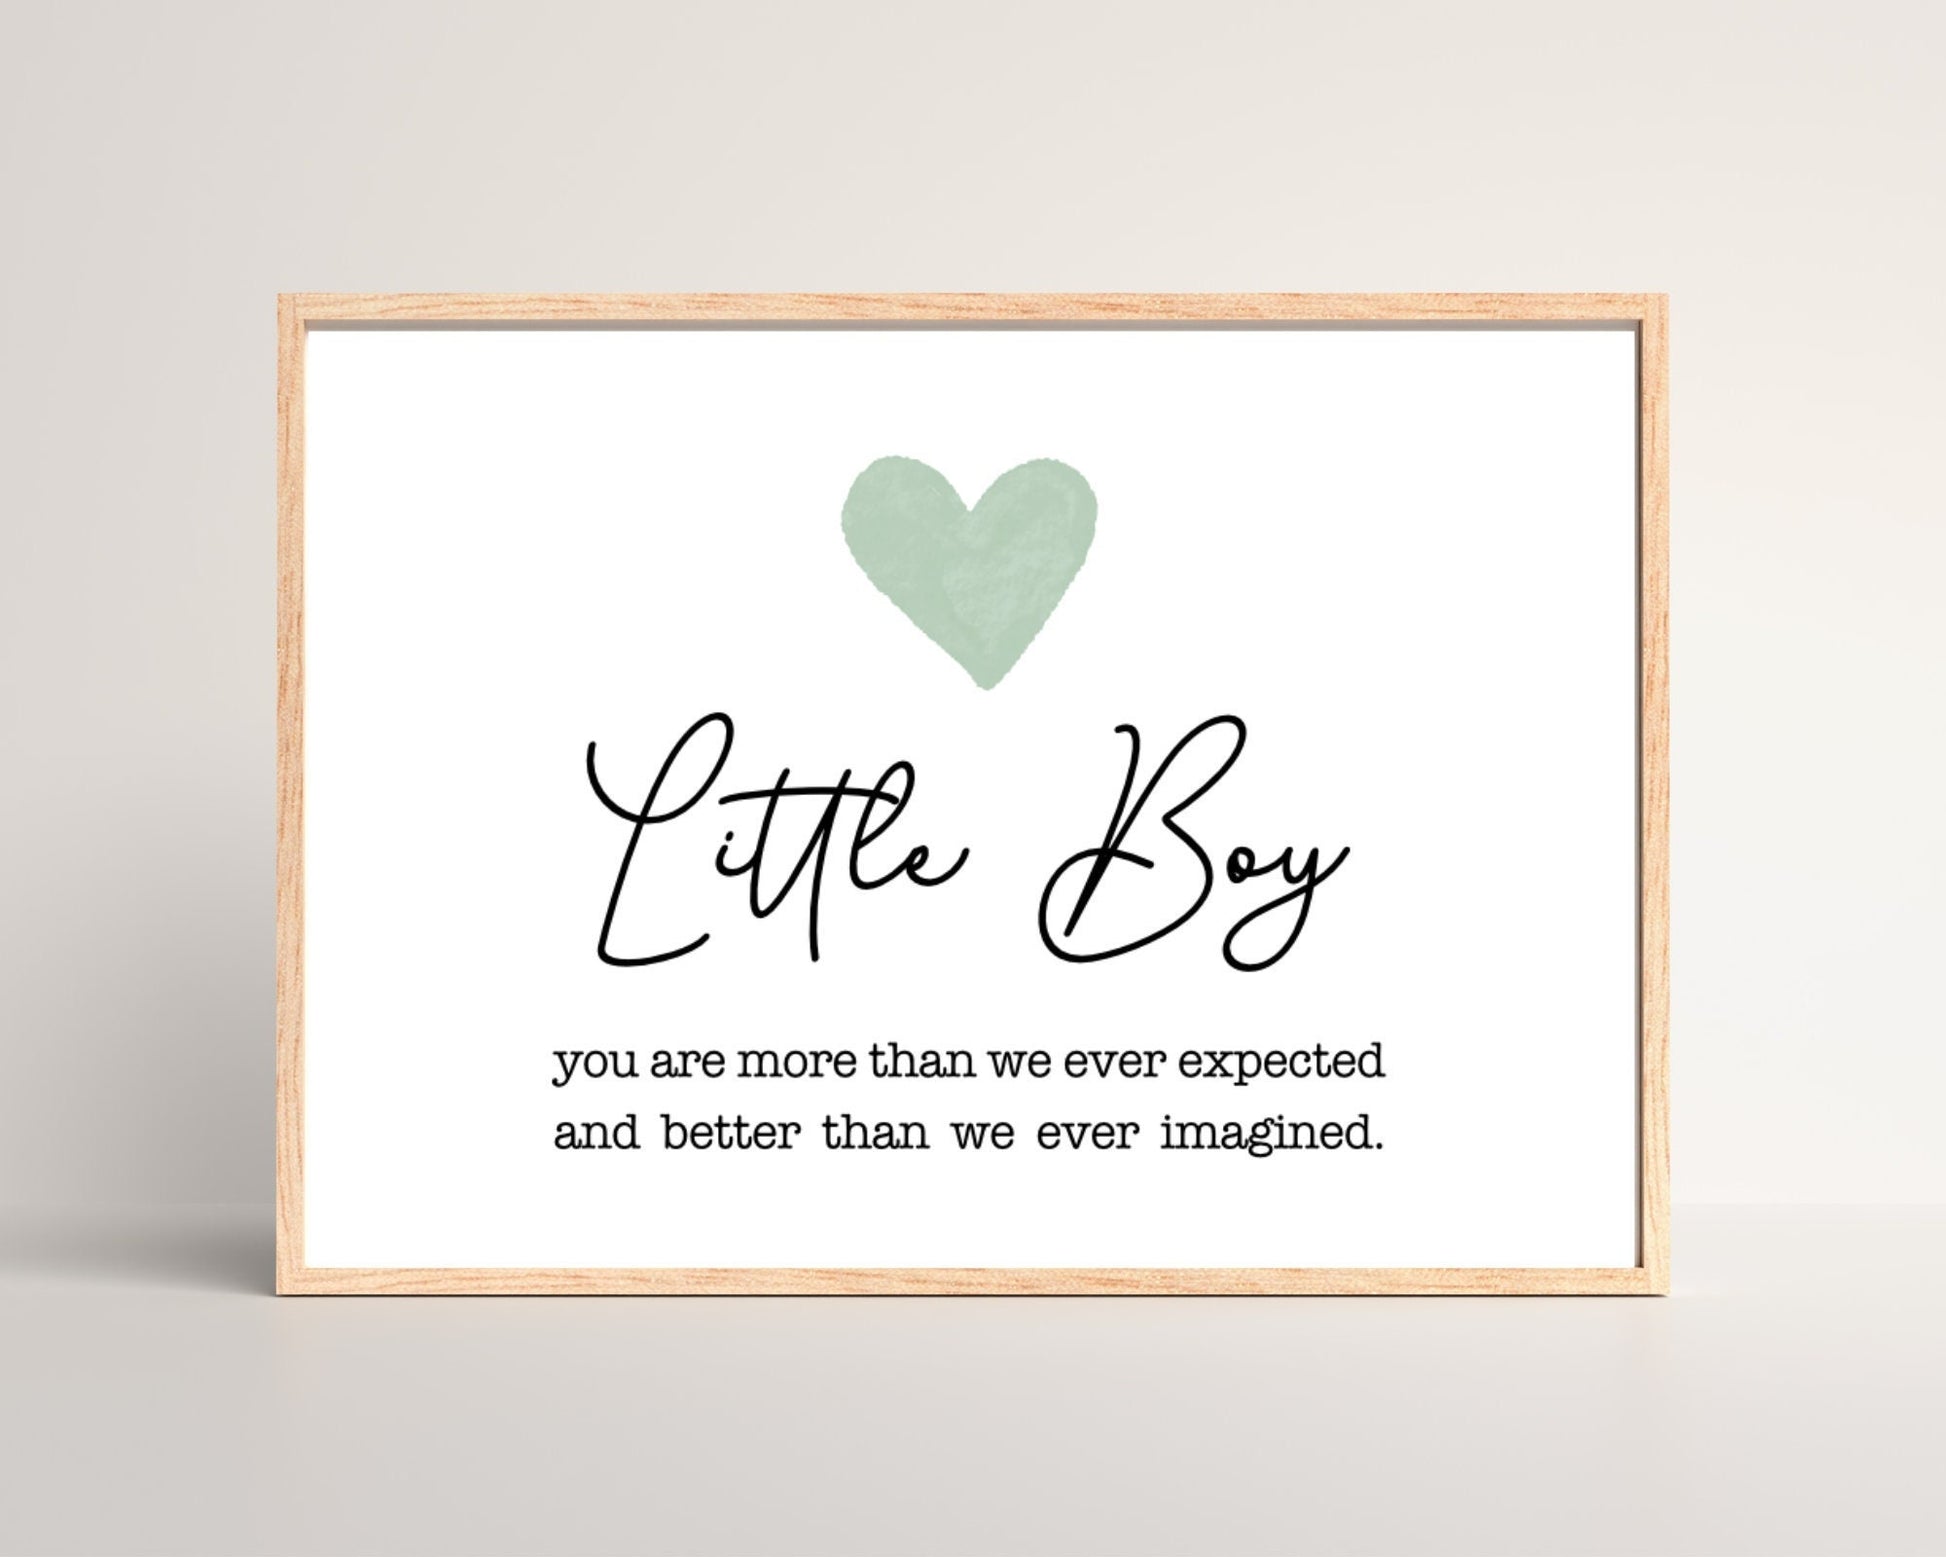 A digital poster placed on a white wall and parquet flooring that has a green heart at the top, and a piece of writing that says: “Little boy, you are more than we ever expected and better than we ever imagined.”